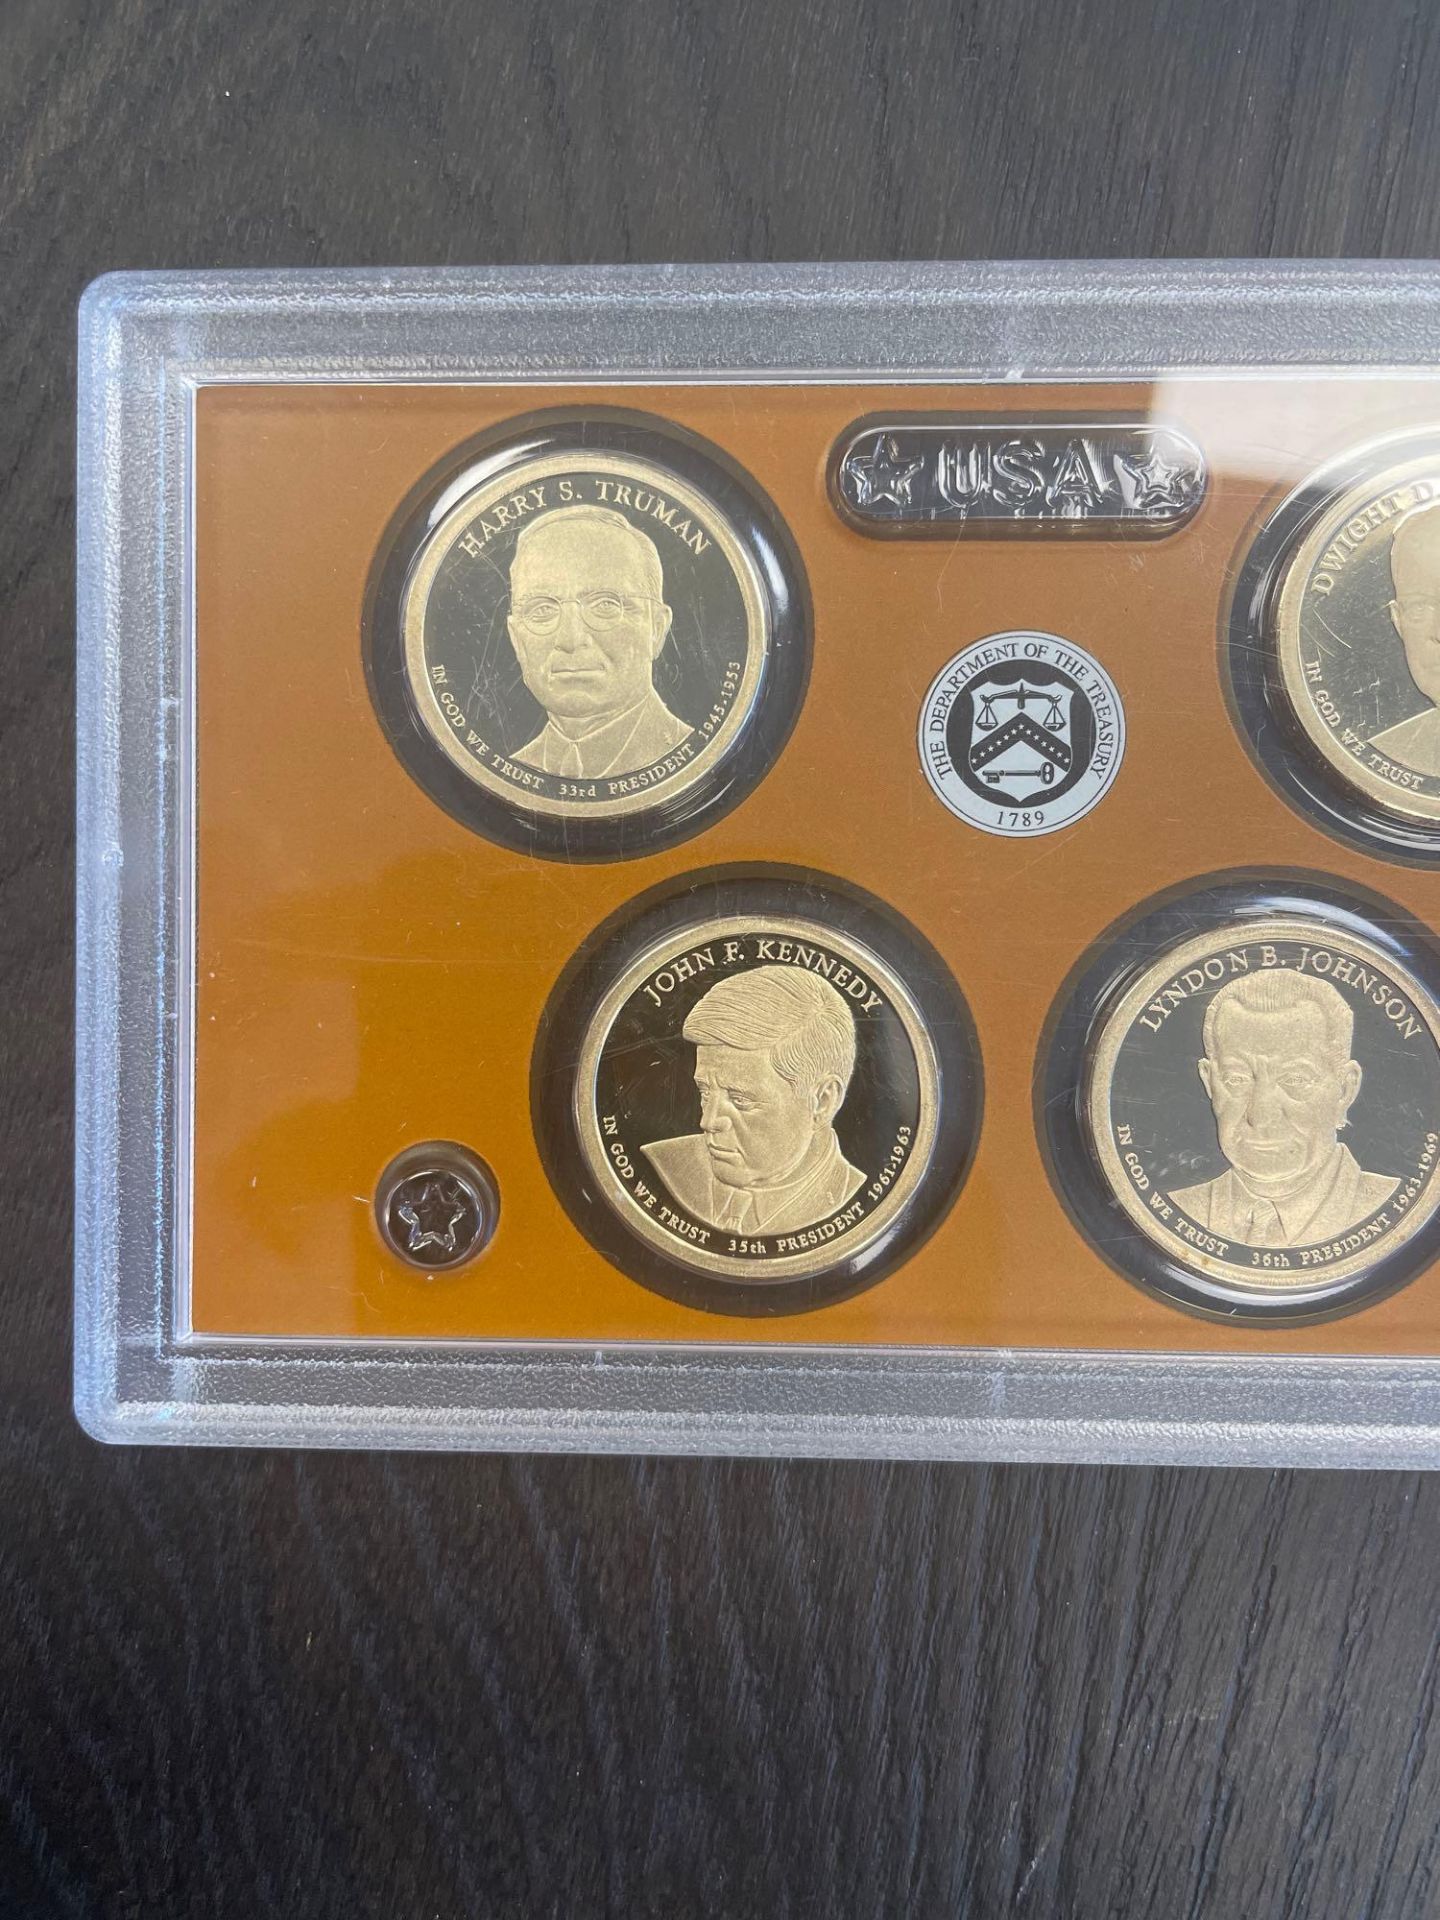 $1 Dollar Presidents Coins - Image 3 of 4